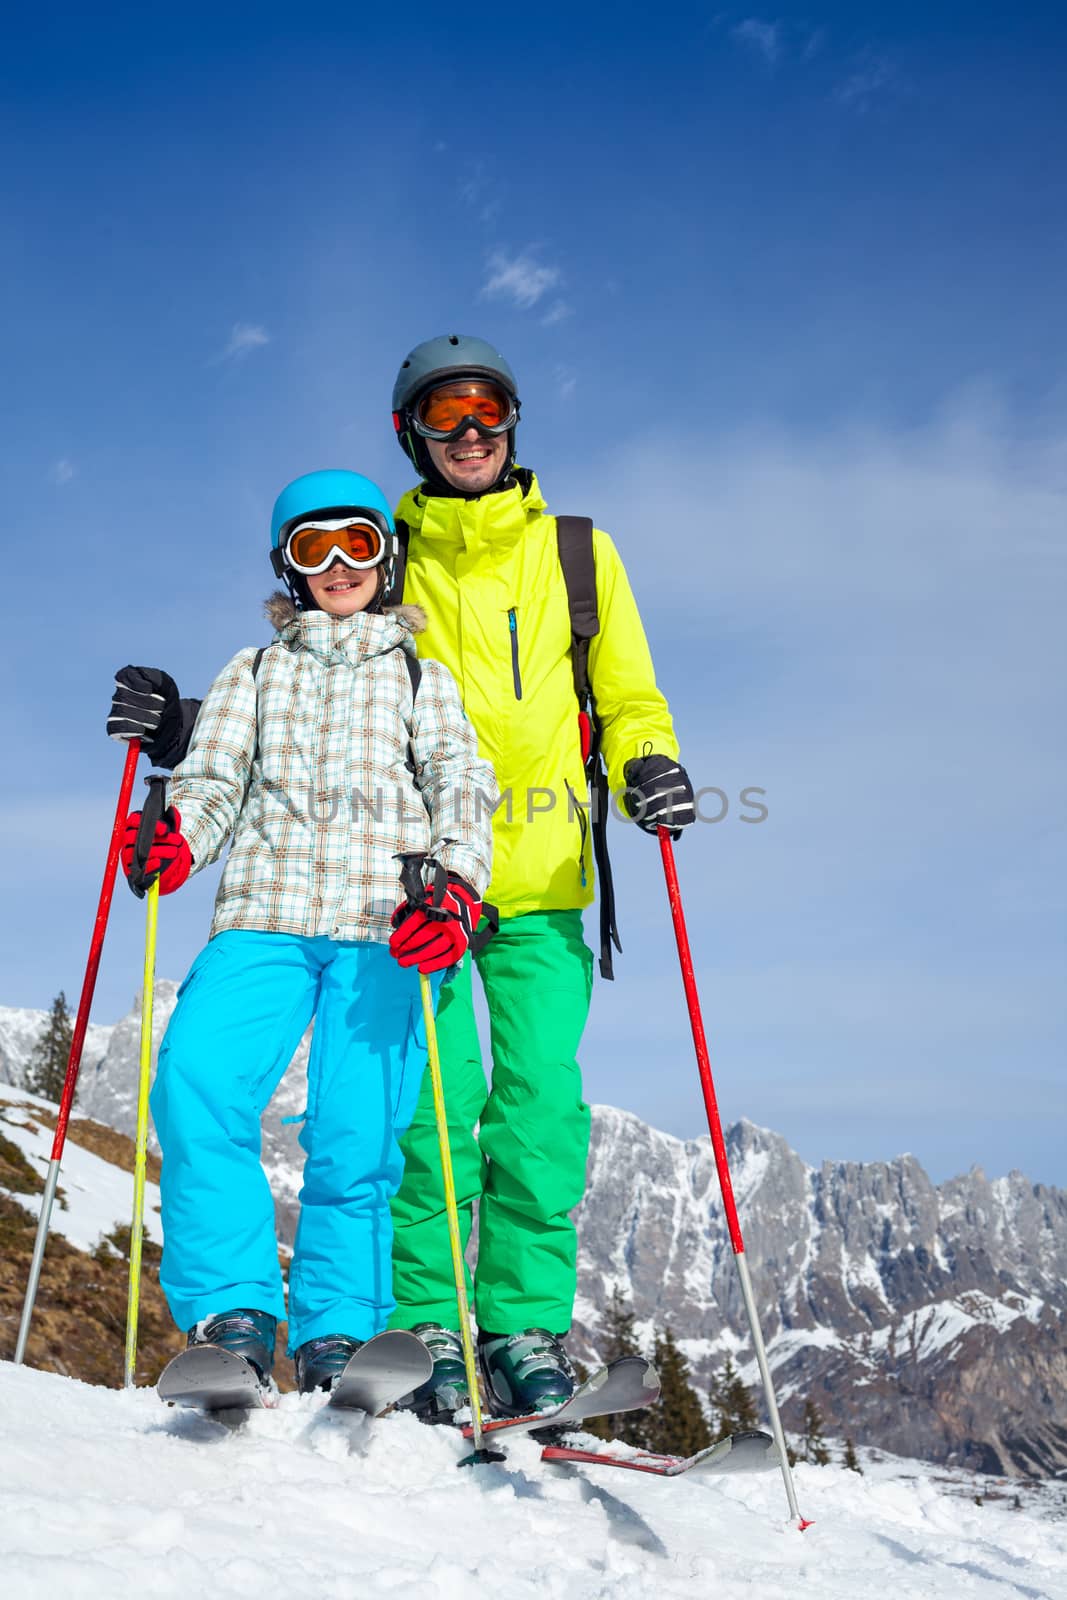 Ski, winter, snow, skiers, sun and fun - Family - father and daughter enjoying winter vacations.